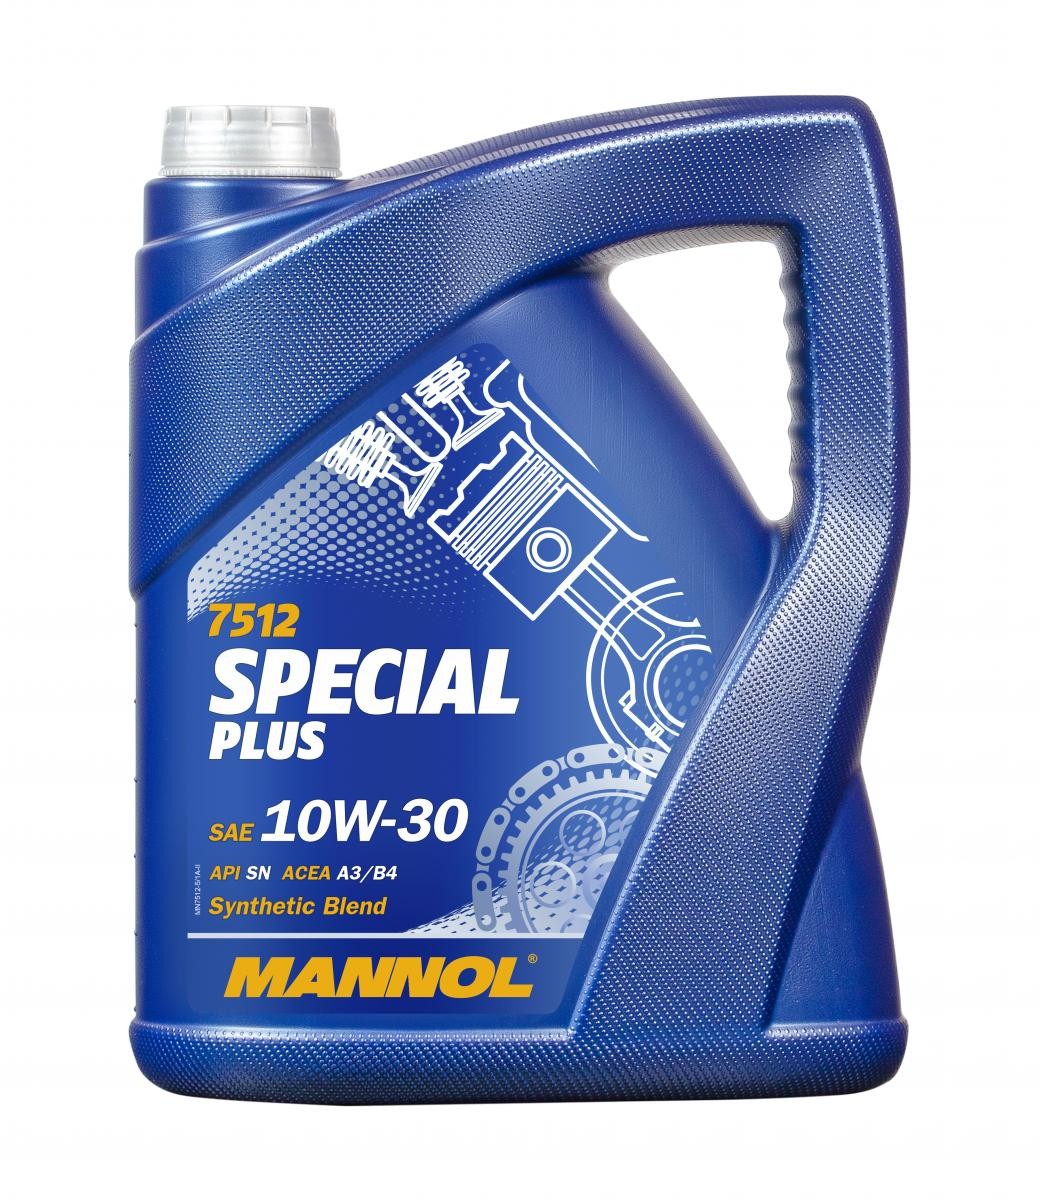 MANNOL SPECIAL PLUS MN7512-5 Engine oil 10W-30, 5l, Part Synthetic Oil